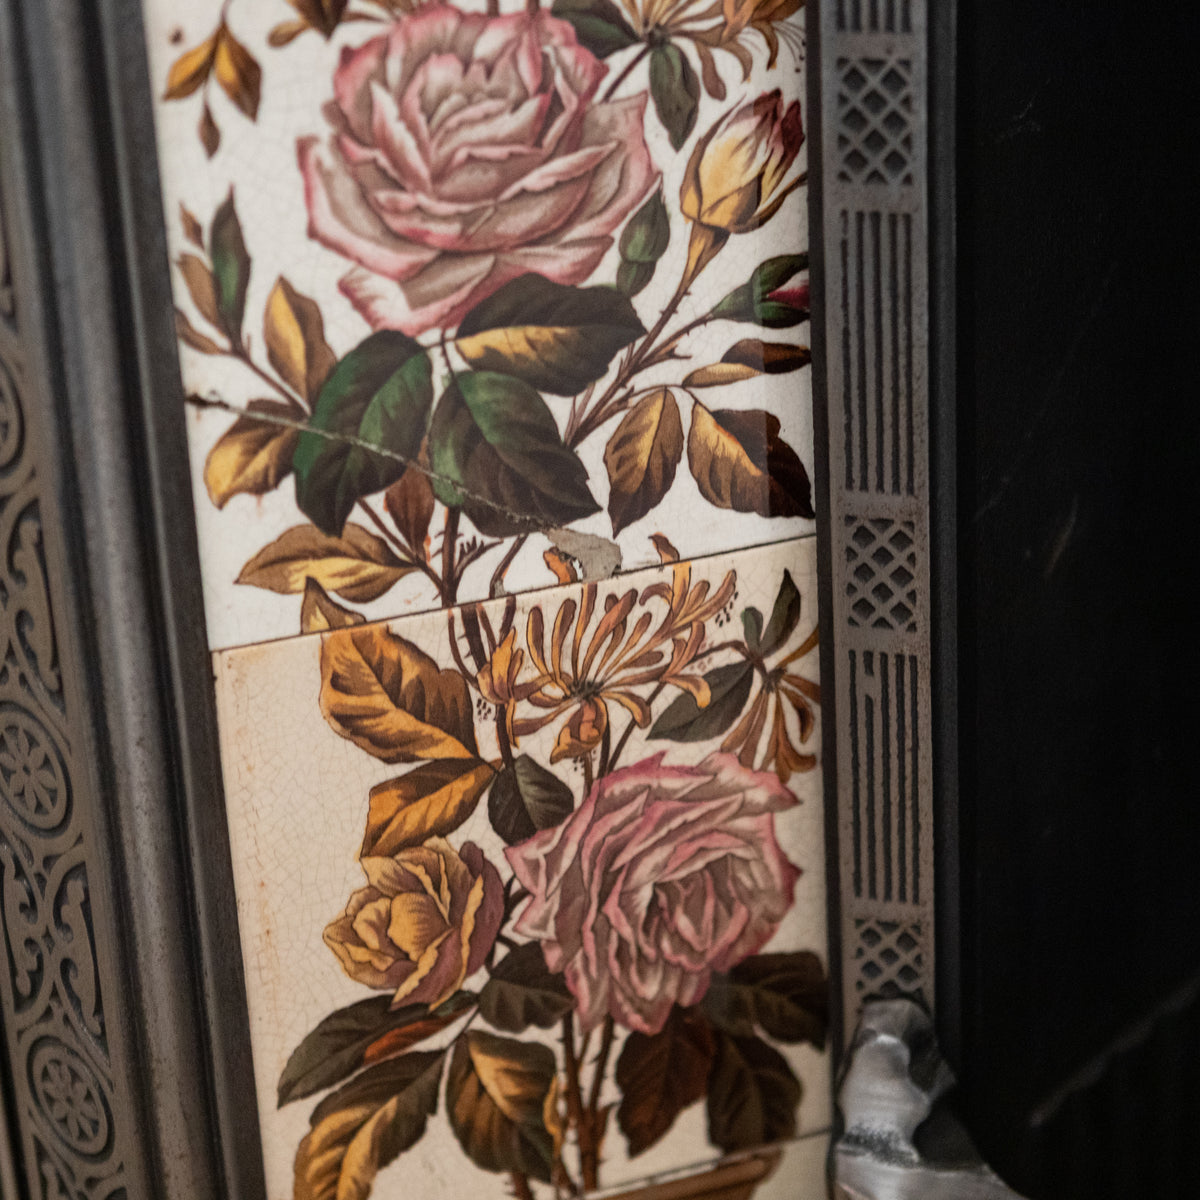 Antique Polished Cast Iron Fireplace Insert with Tiles | The Architectural Forum